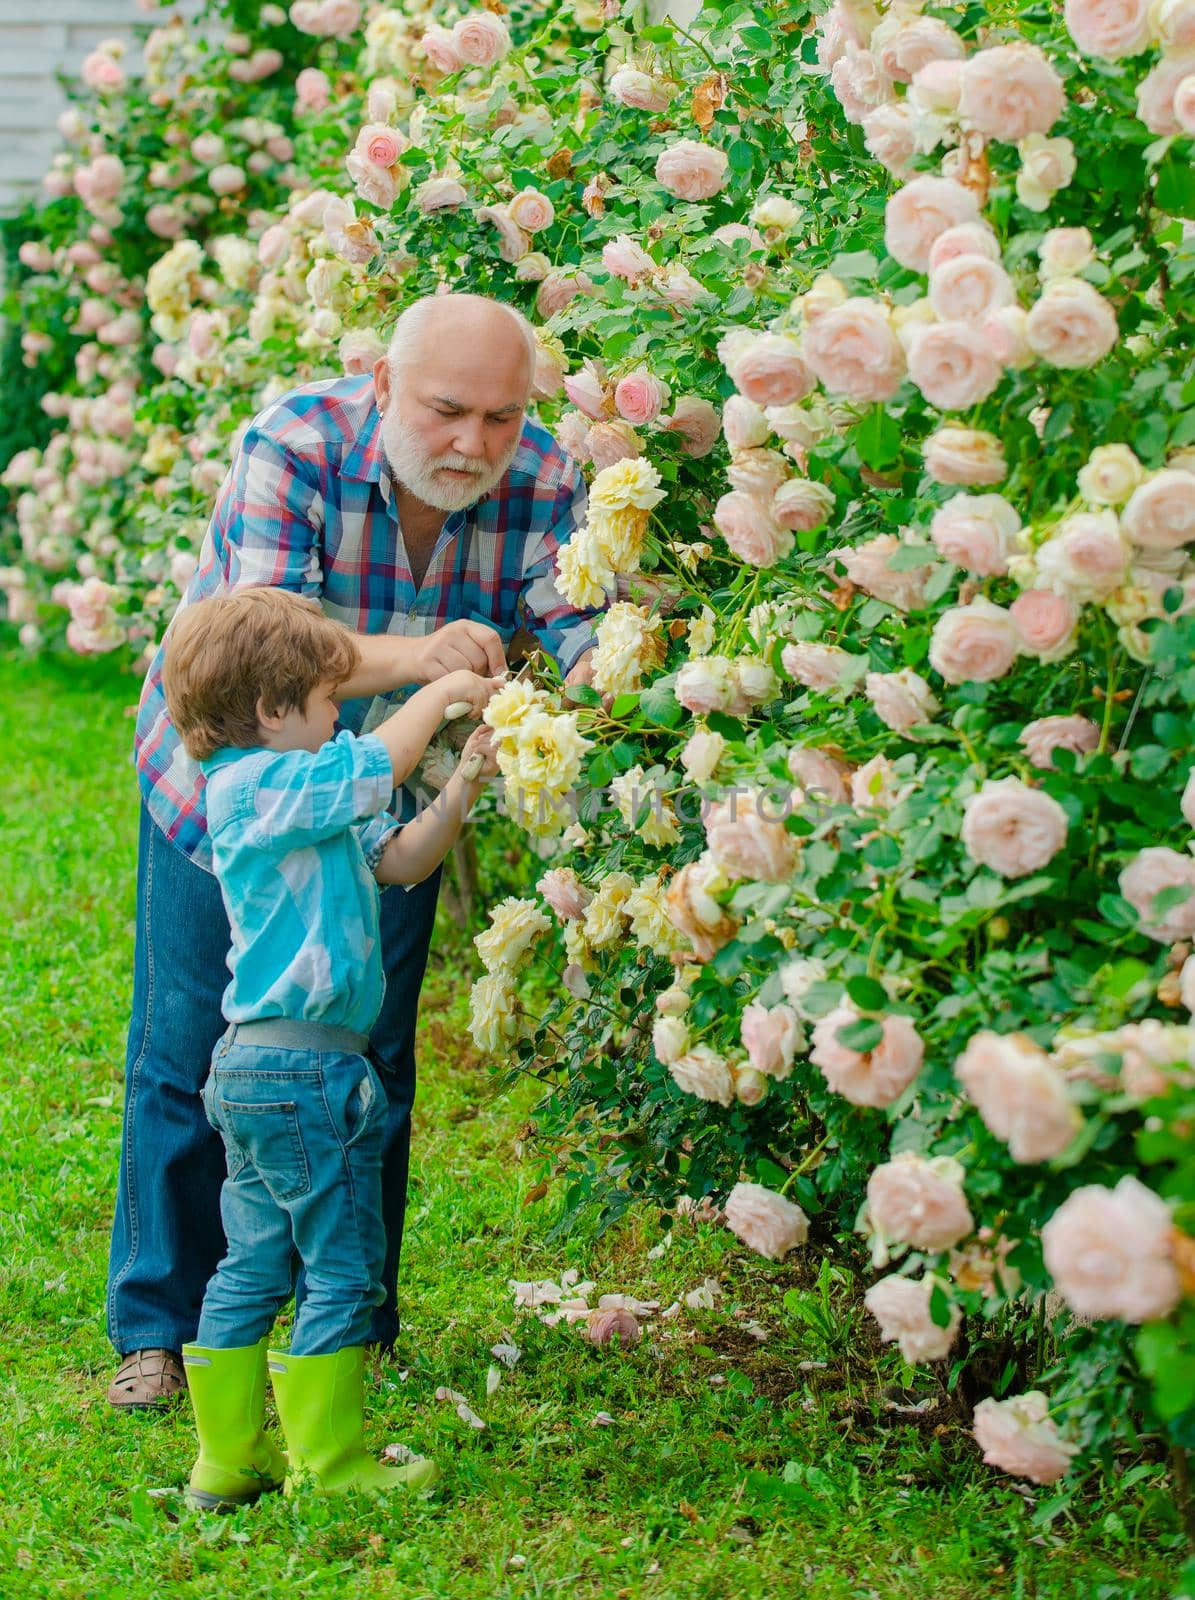 Gardener cutting flowers in his garden. A grandfather and a toddler are working in flowers park. Father and son grows flowers together. Family generation and relations concept. Farm family